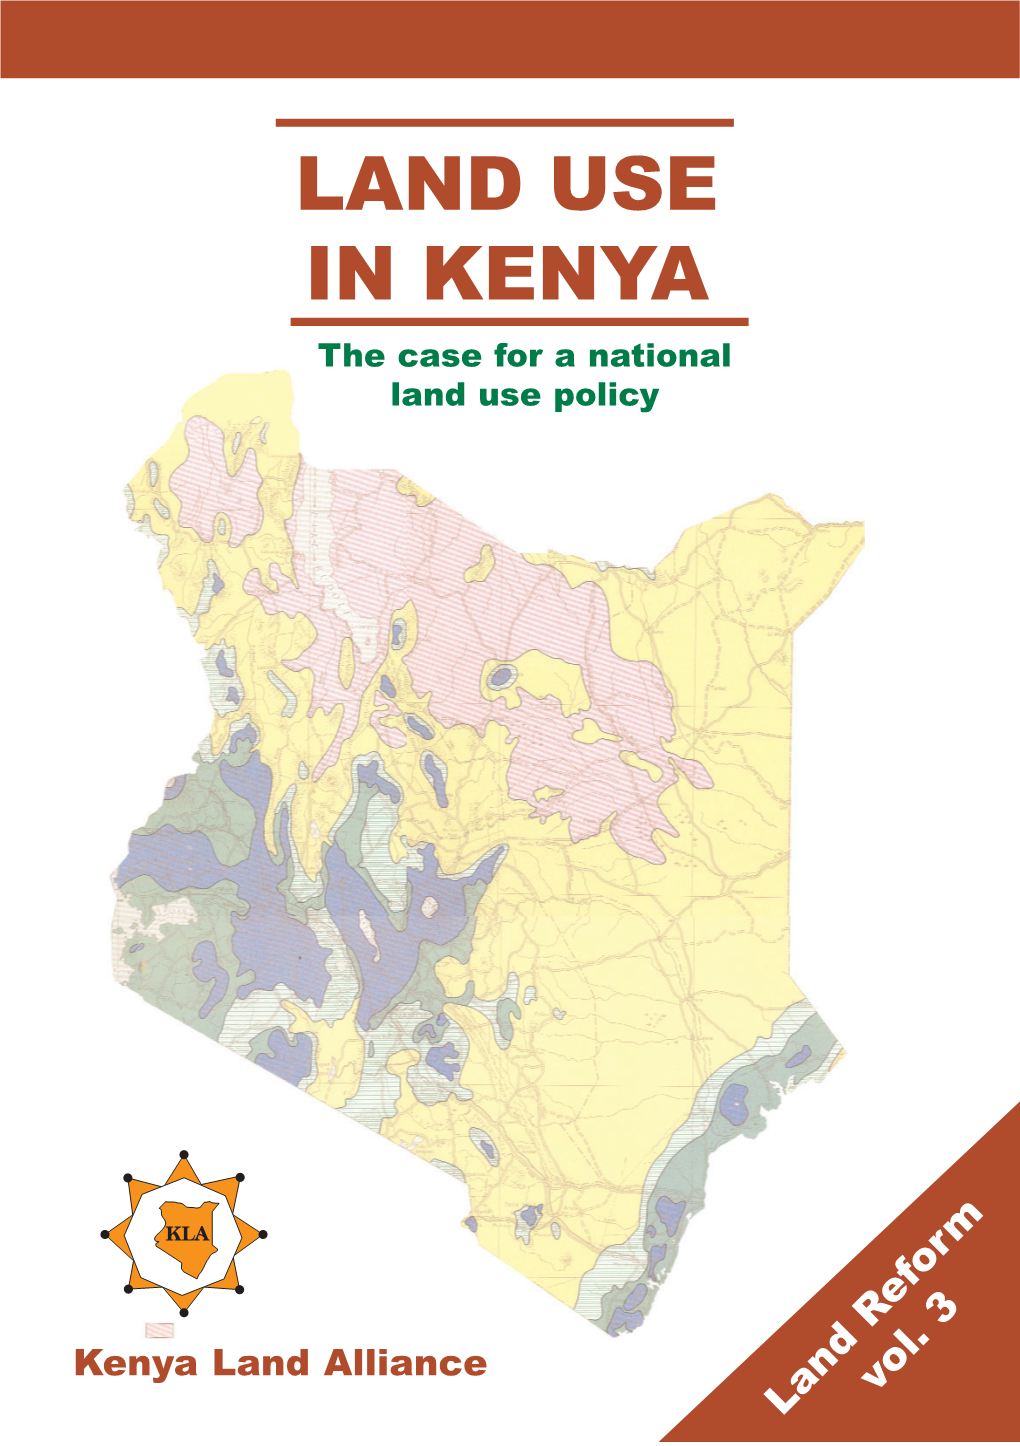 LAND USE in KENYA the Case for a National Land Use Policy